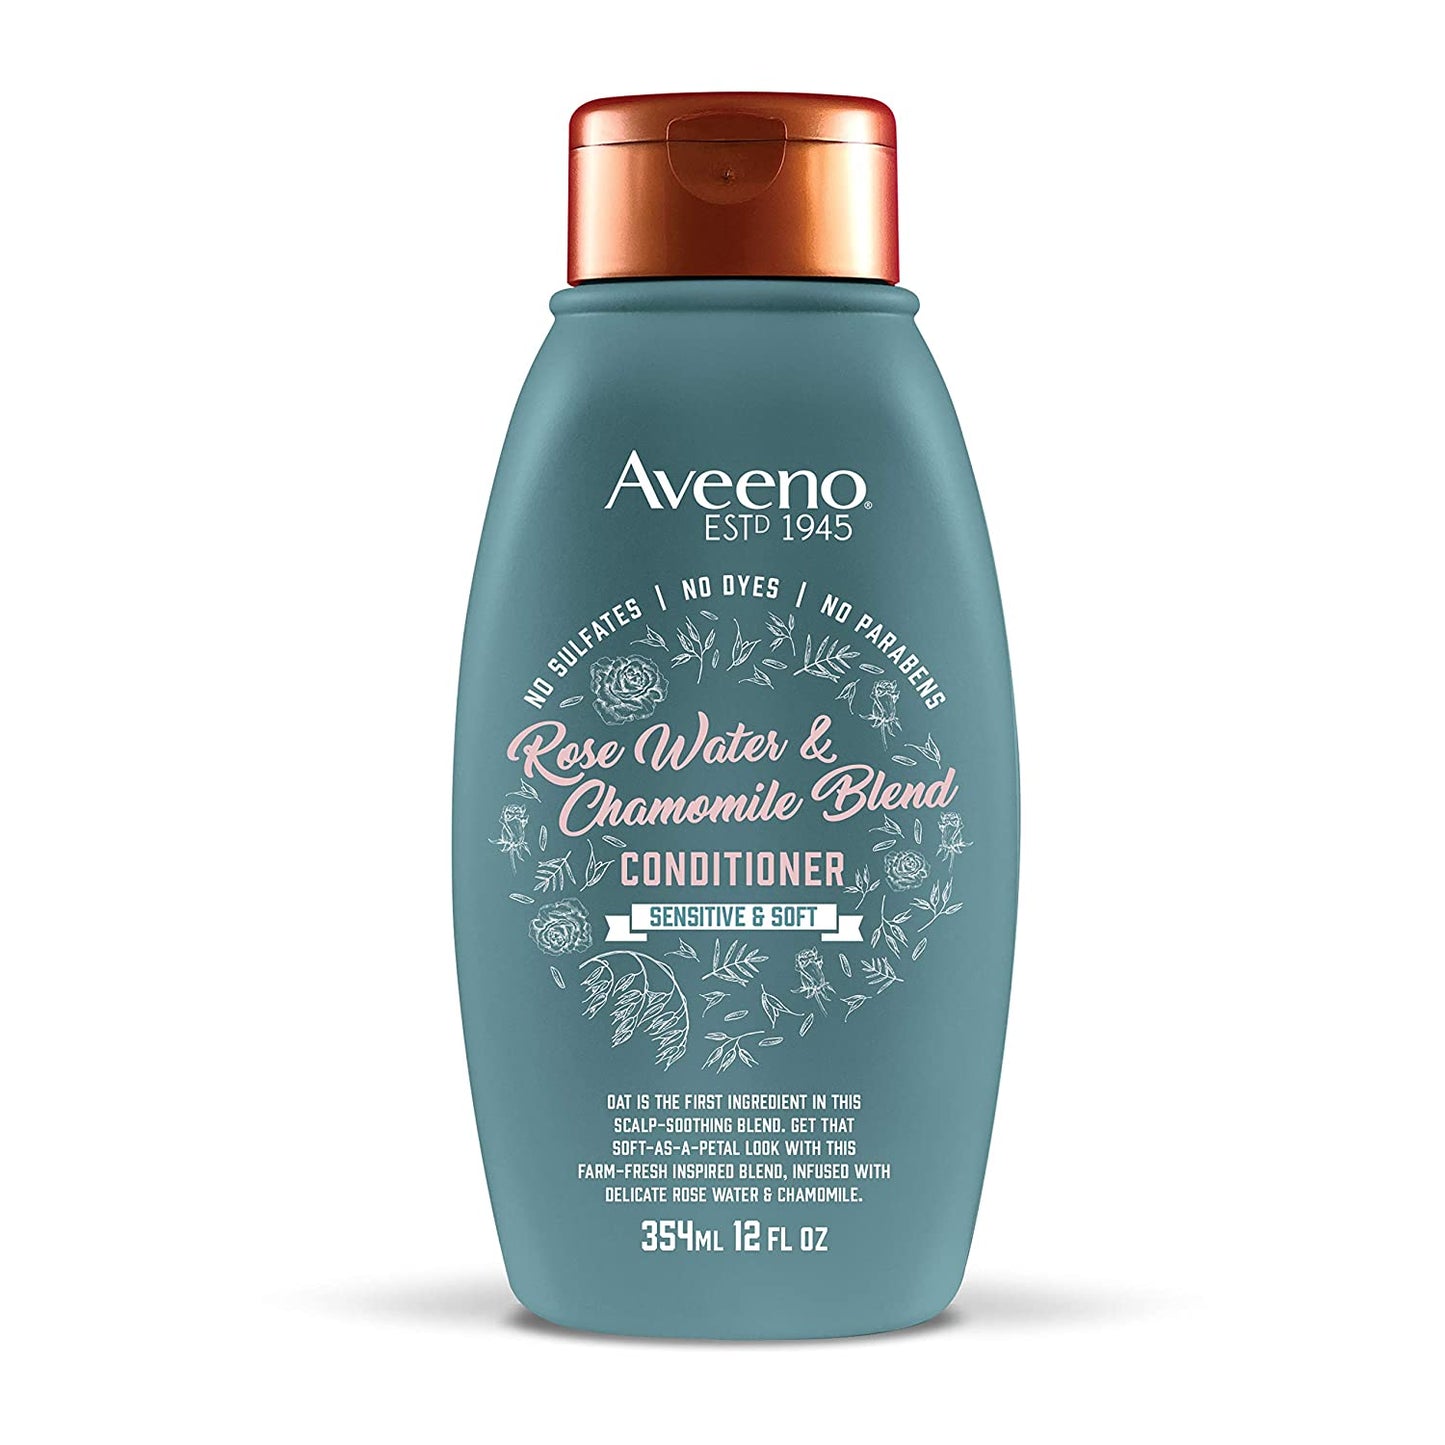 Aveeno Scalp Soothing Rose Water and Chamomile Blend Conditioner, 12 fl.oz / 354ml